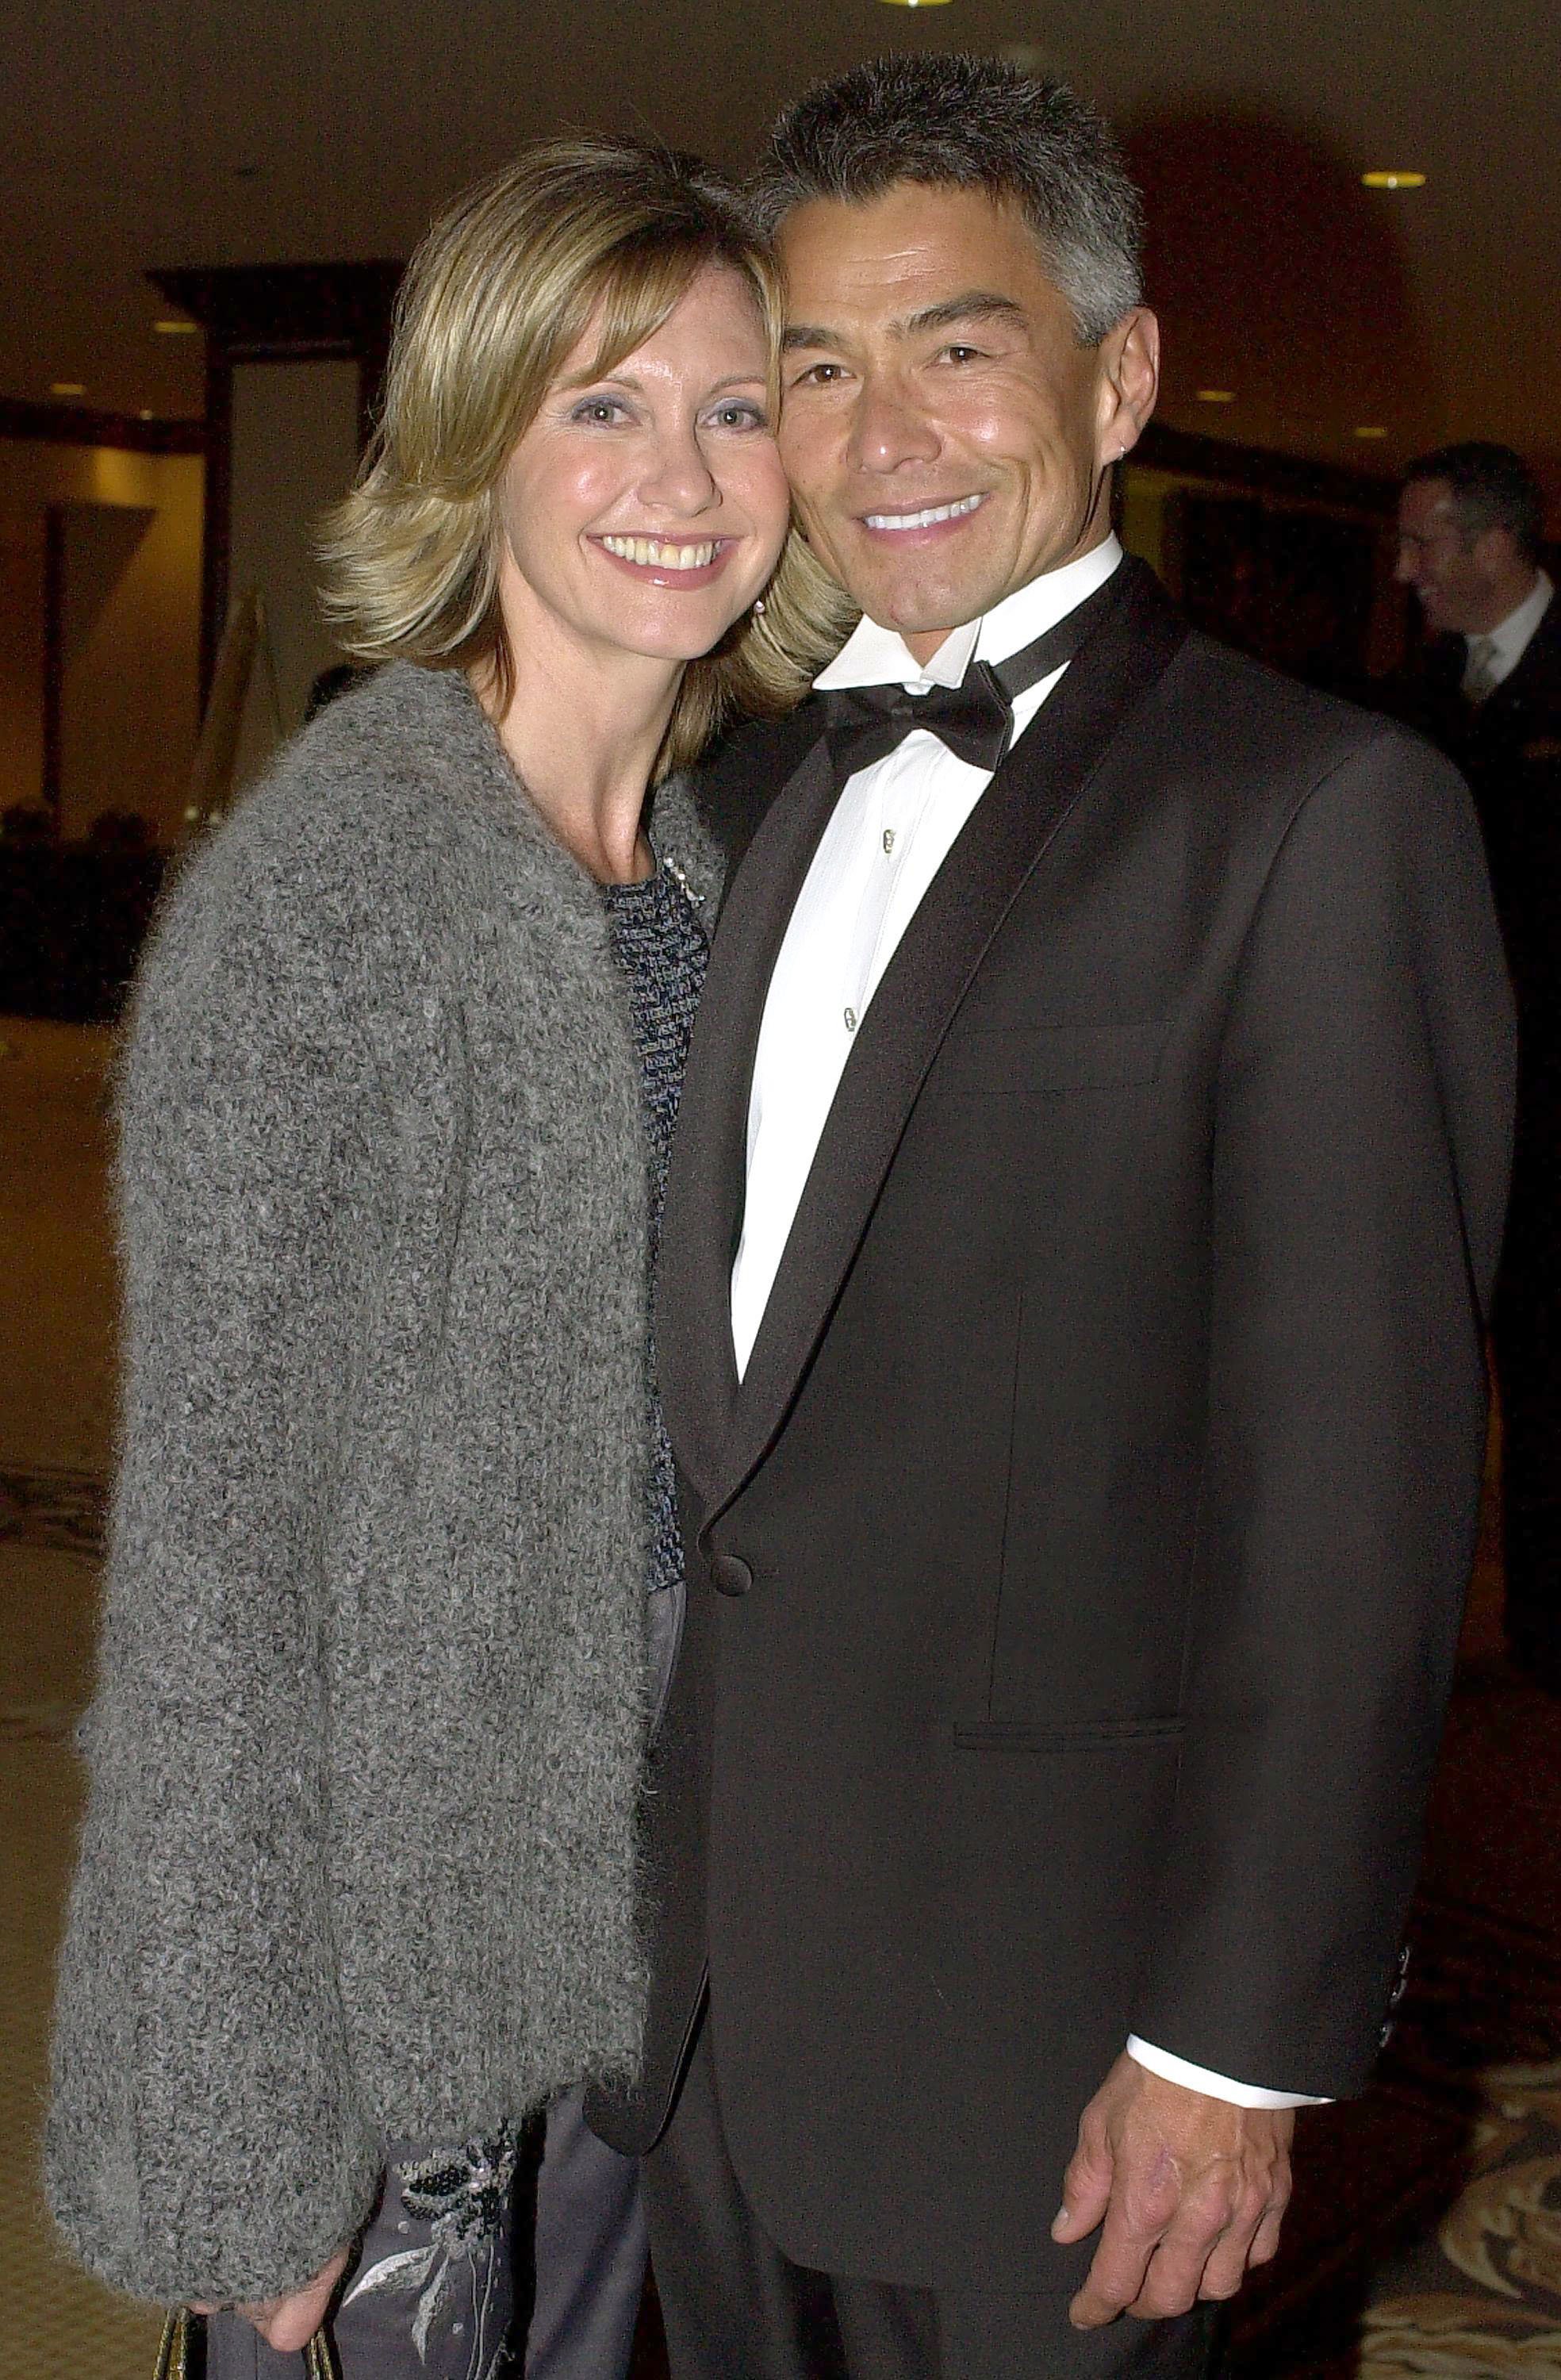 Actress Olivia Newton-John and boyfriend Patrick McDermott attend the 10th Annual Human Rights Campaign Gala, February 17, 2001 in Los Angeles, CA. | Source: Getty Images